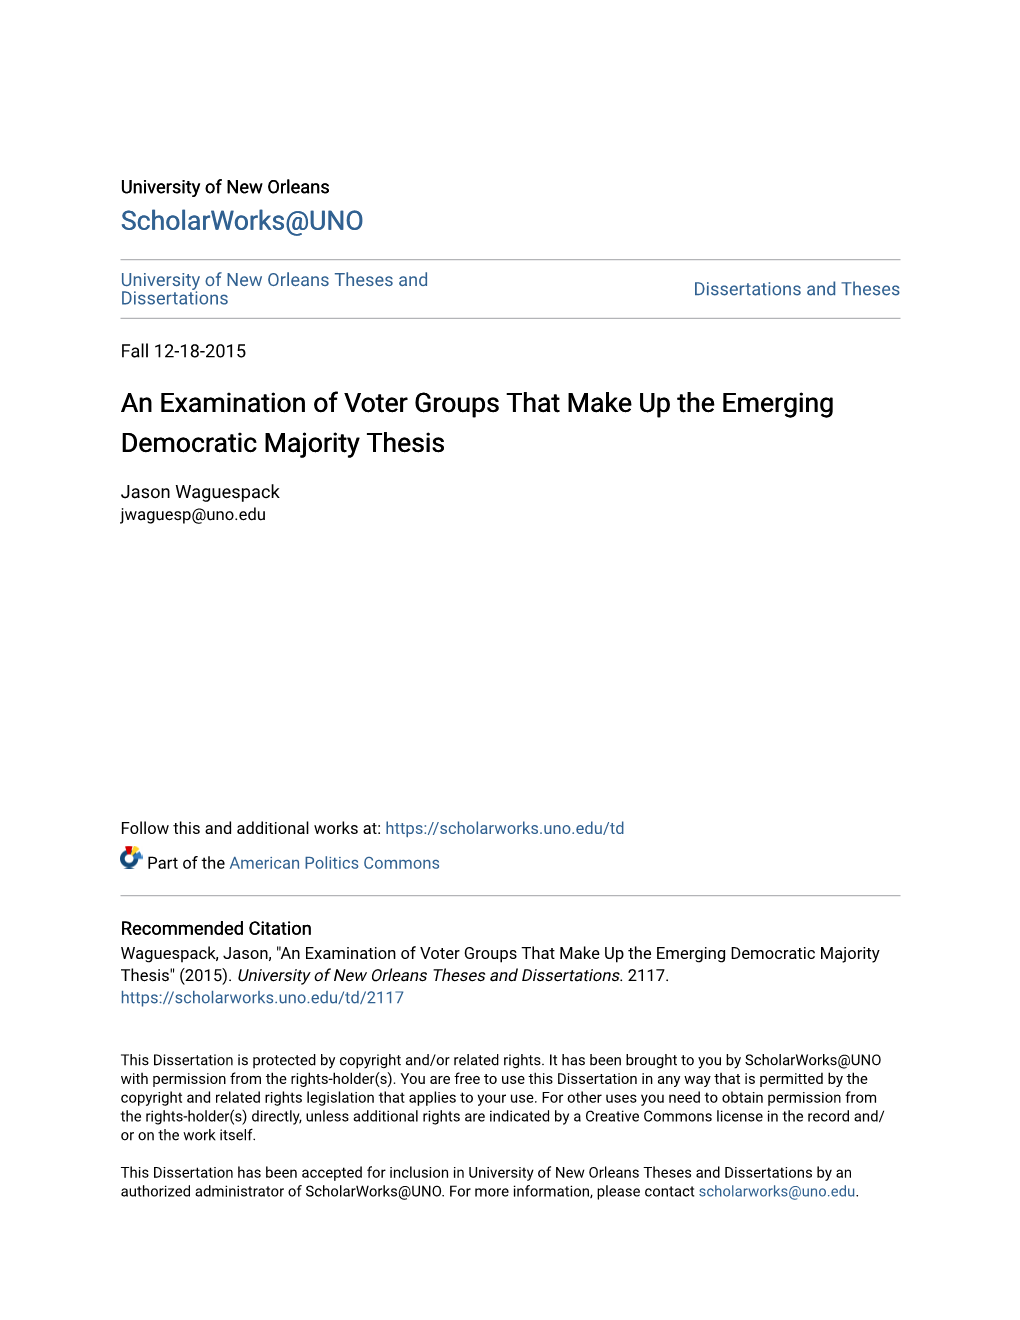 An Examination of Voter Groups That Make up the Emerging Democratic Majority Thesis